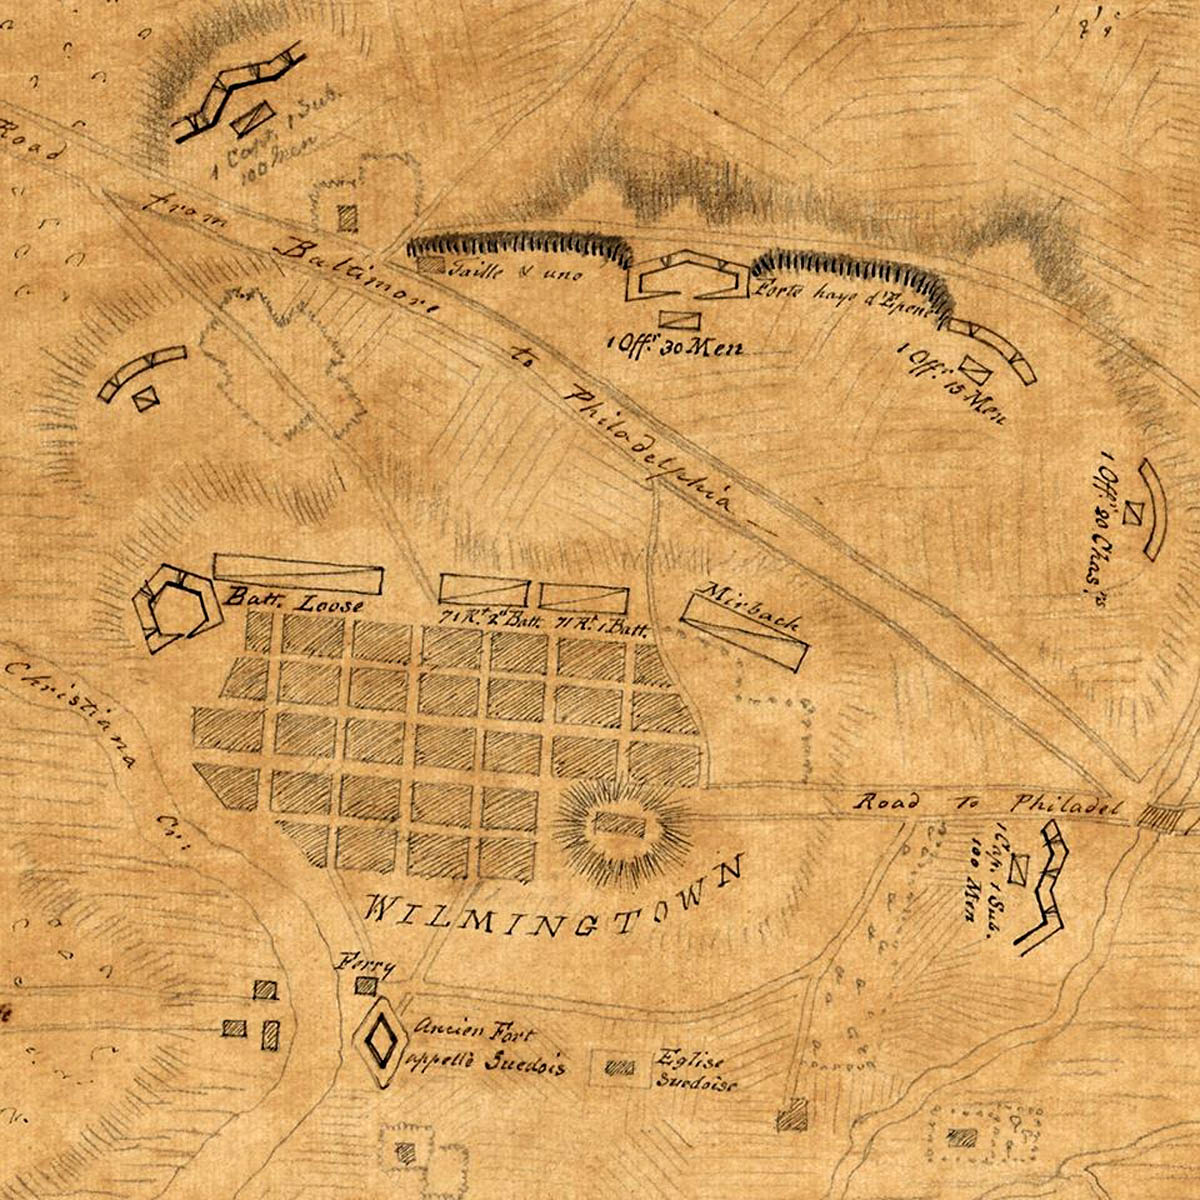 Revolutionary War era map of Wilmington Delaware including the Old Swedes Fort Christina late 1700s